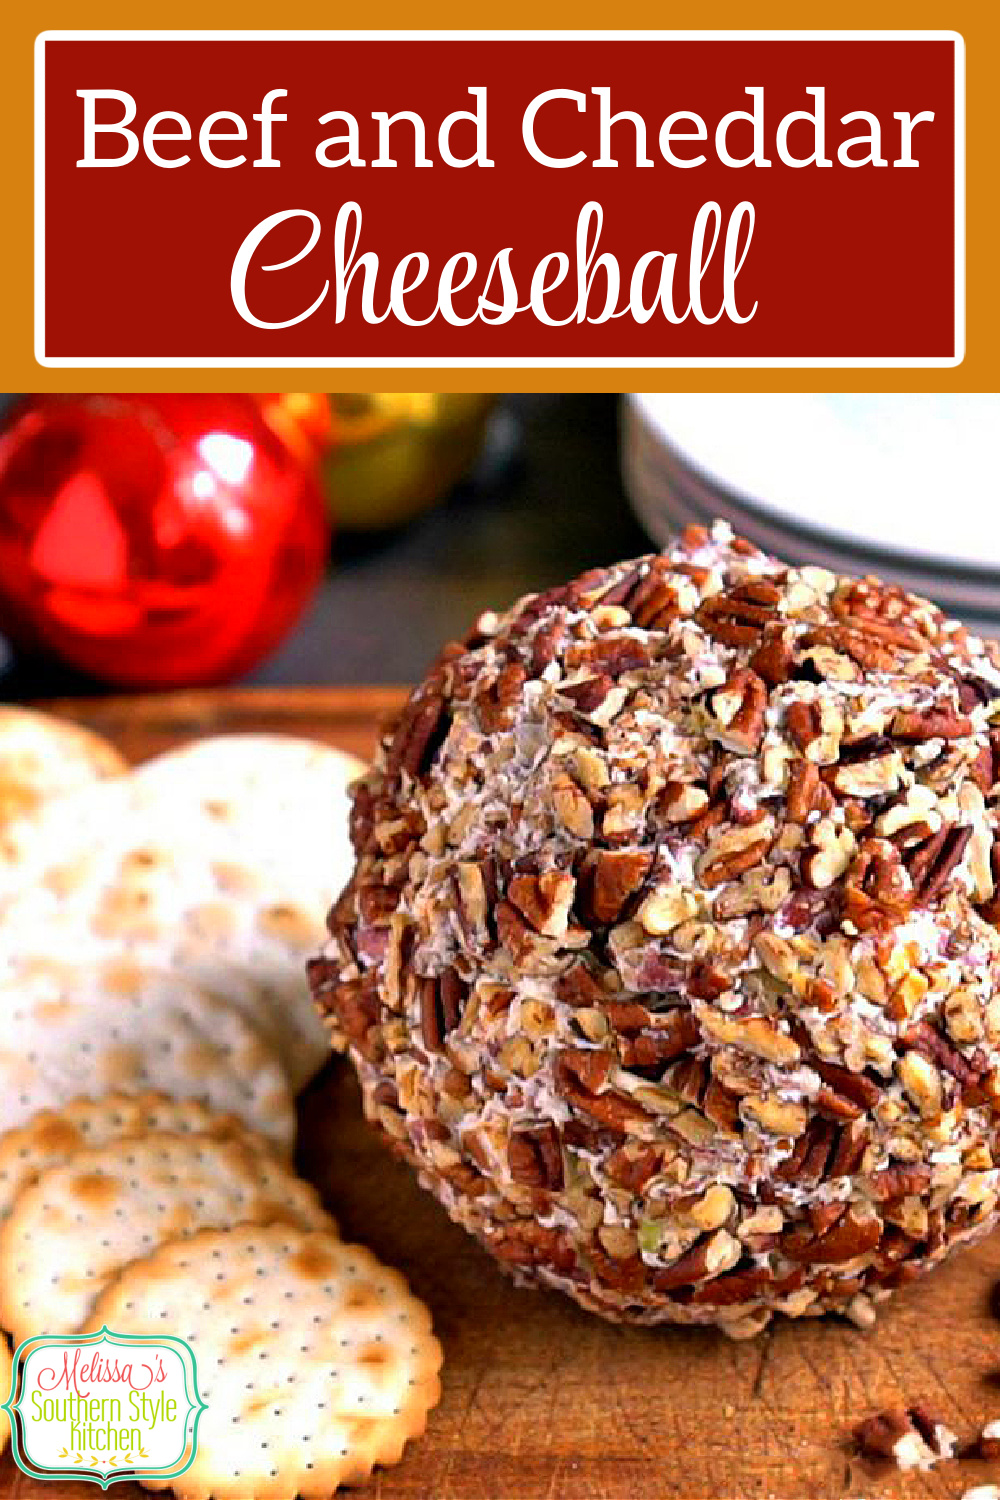 Beef and Cheddar Cheeseball is ideal for any occasion when delicious make-ahead starters are on the menu #beefandcheddarcheeseball #cheeseball #beefcheeseballreipes #holidayappetizers #easyappetizers #beef #footballsnacks #cheddarcheeseballs #easyrecipes #southernfood #southernrecipes